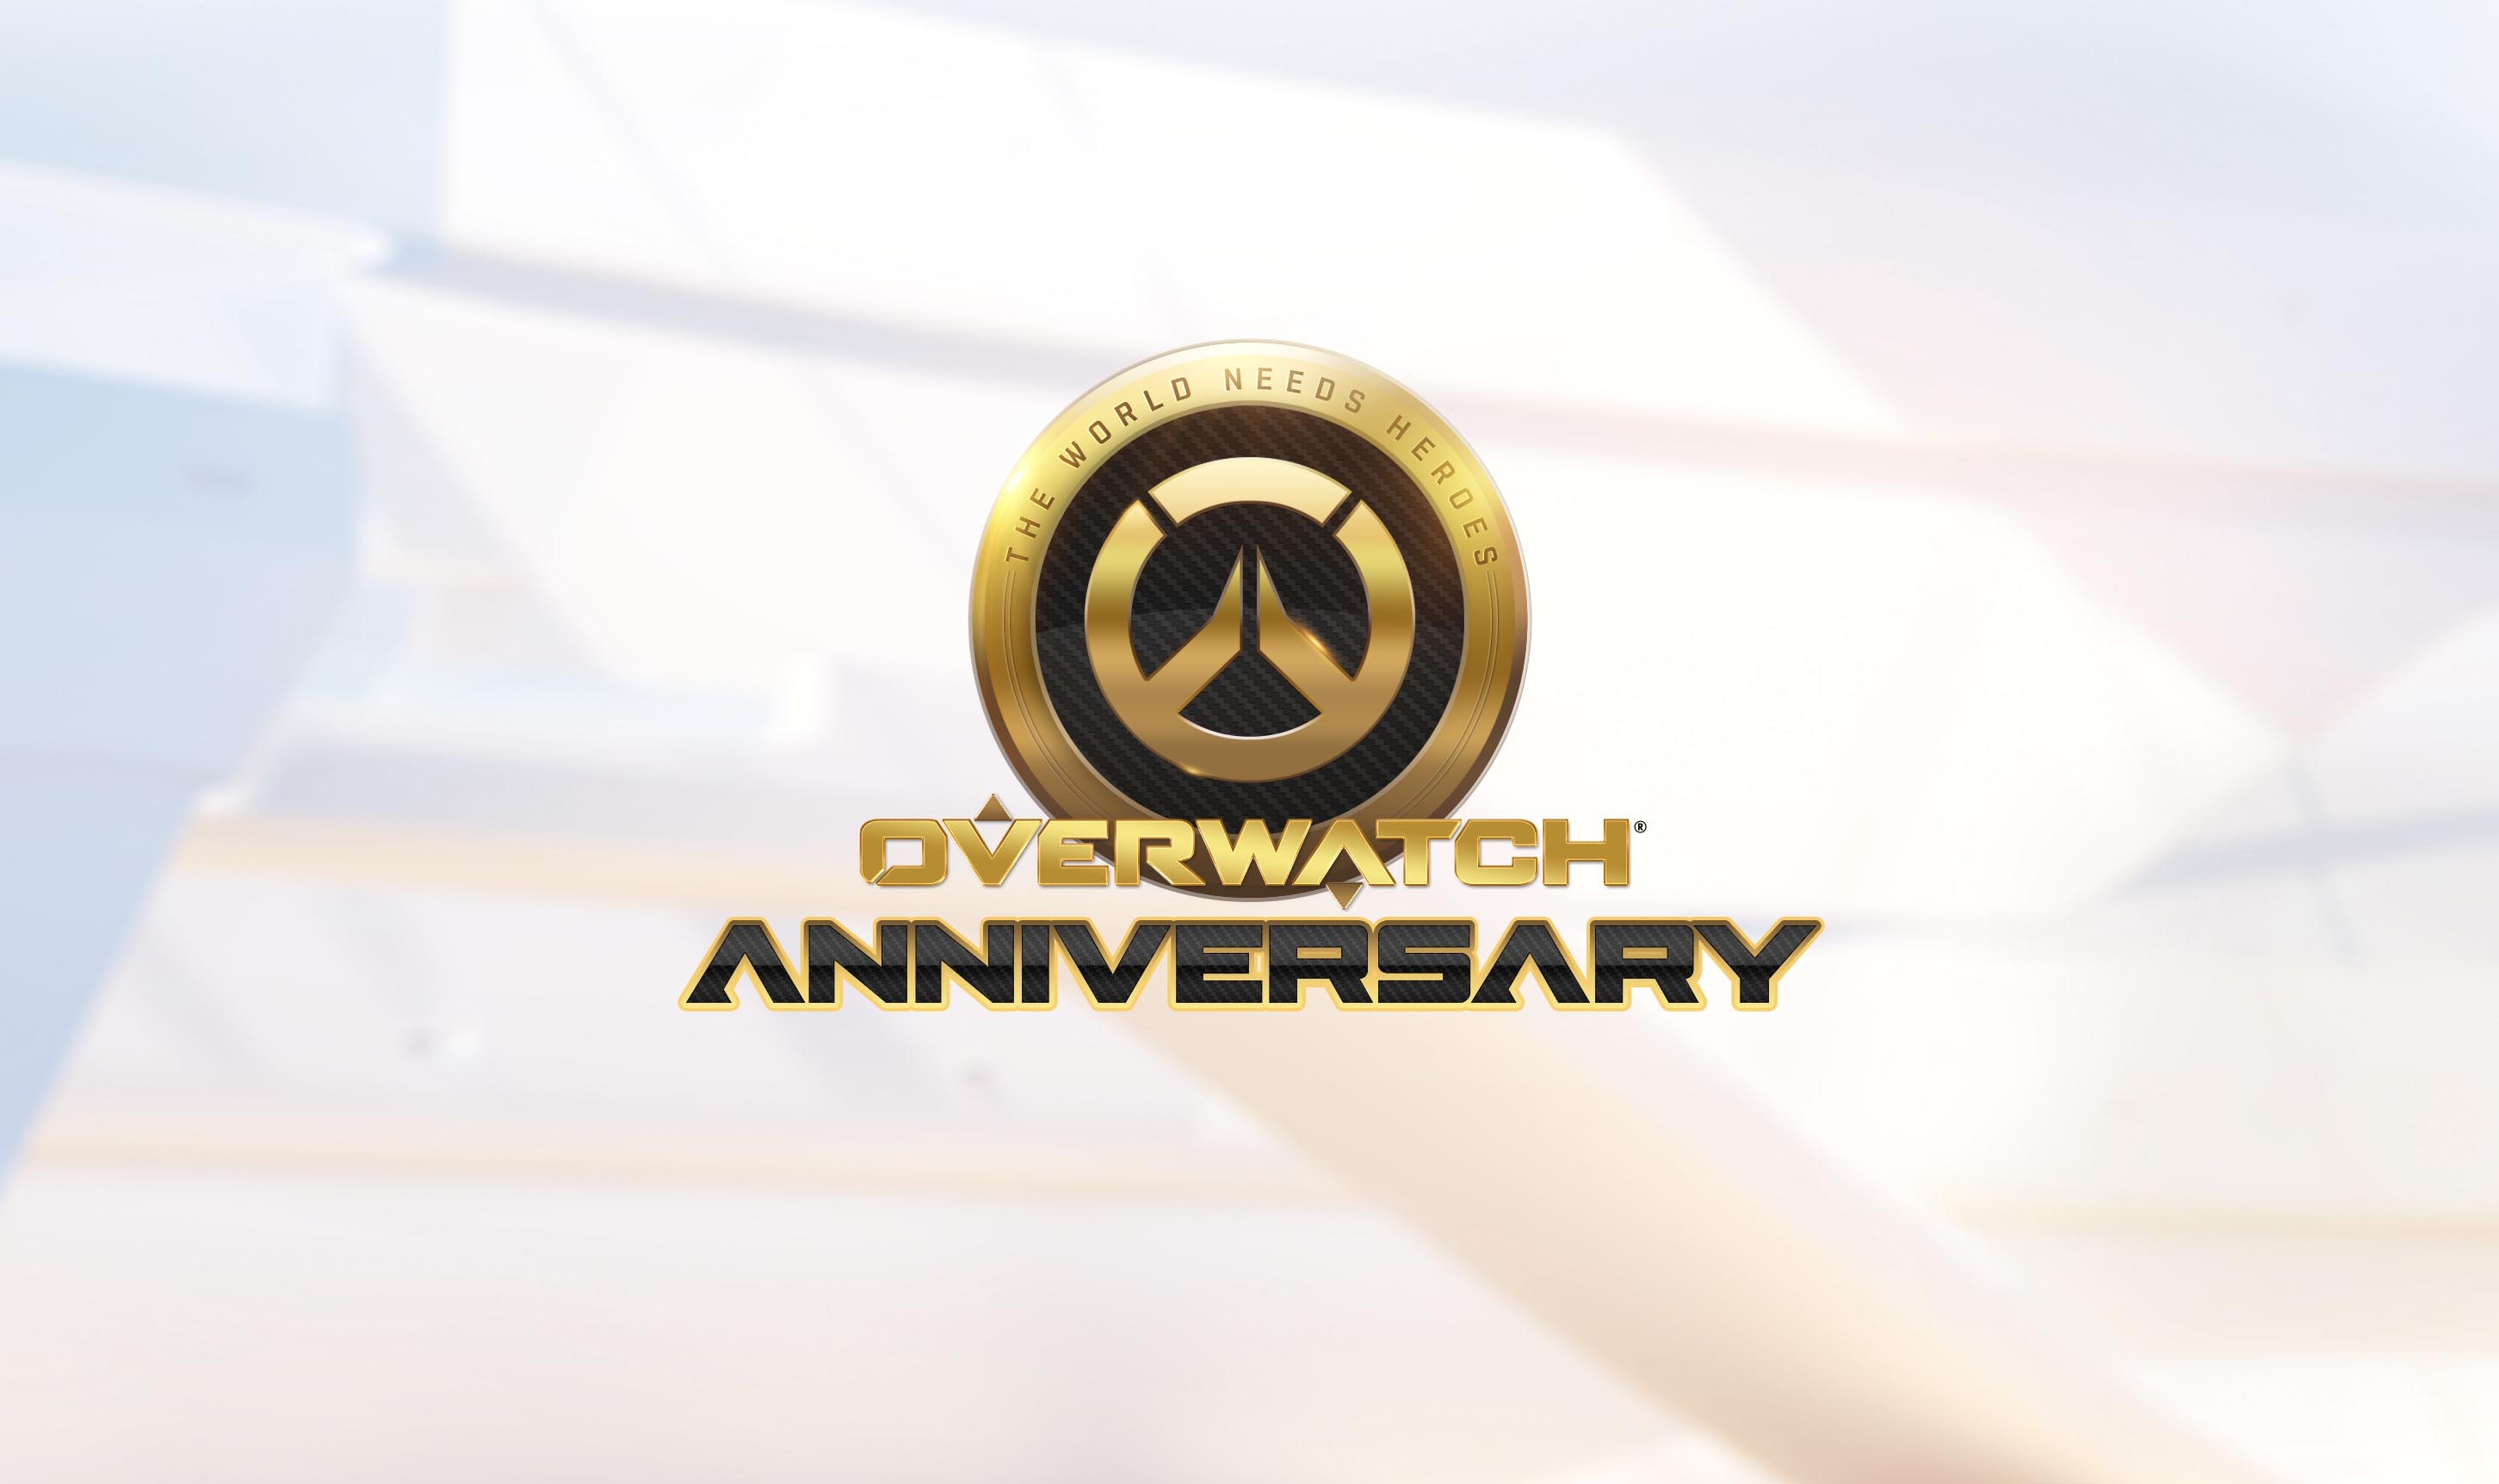 'Overwatch' Anniversary Event When Does It End?